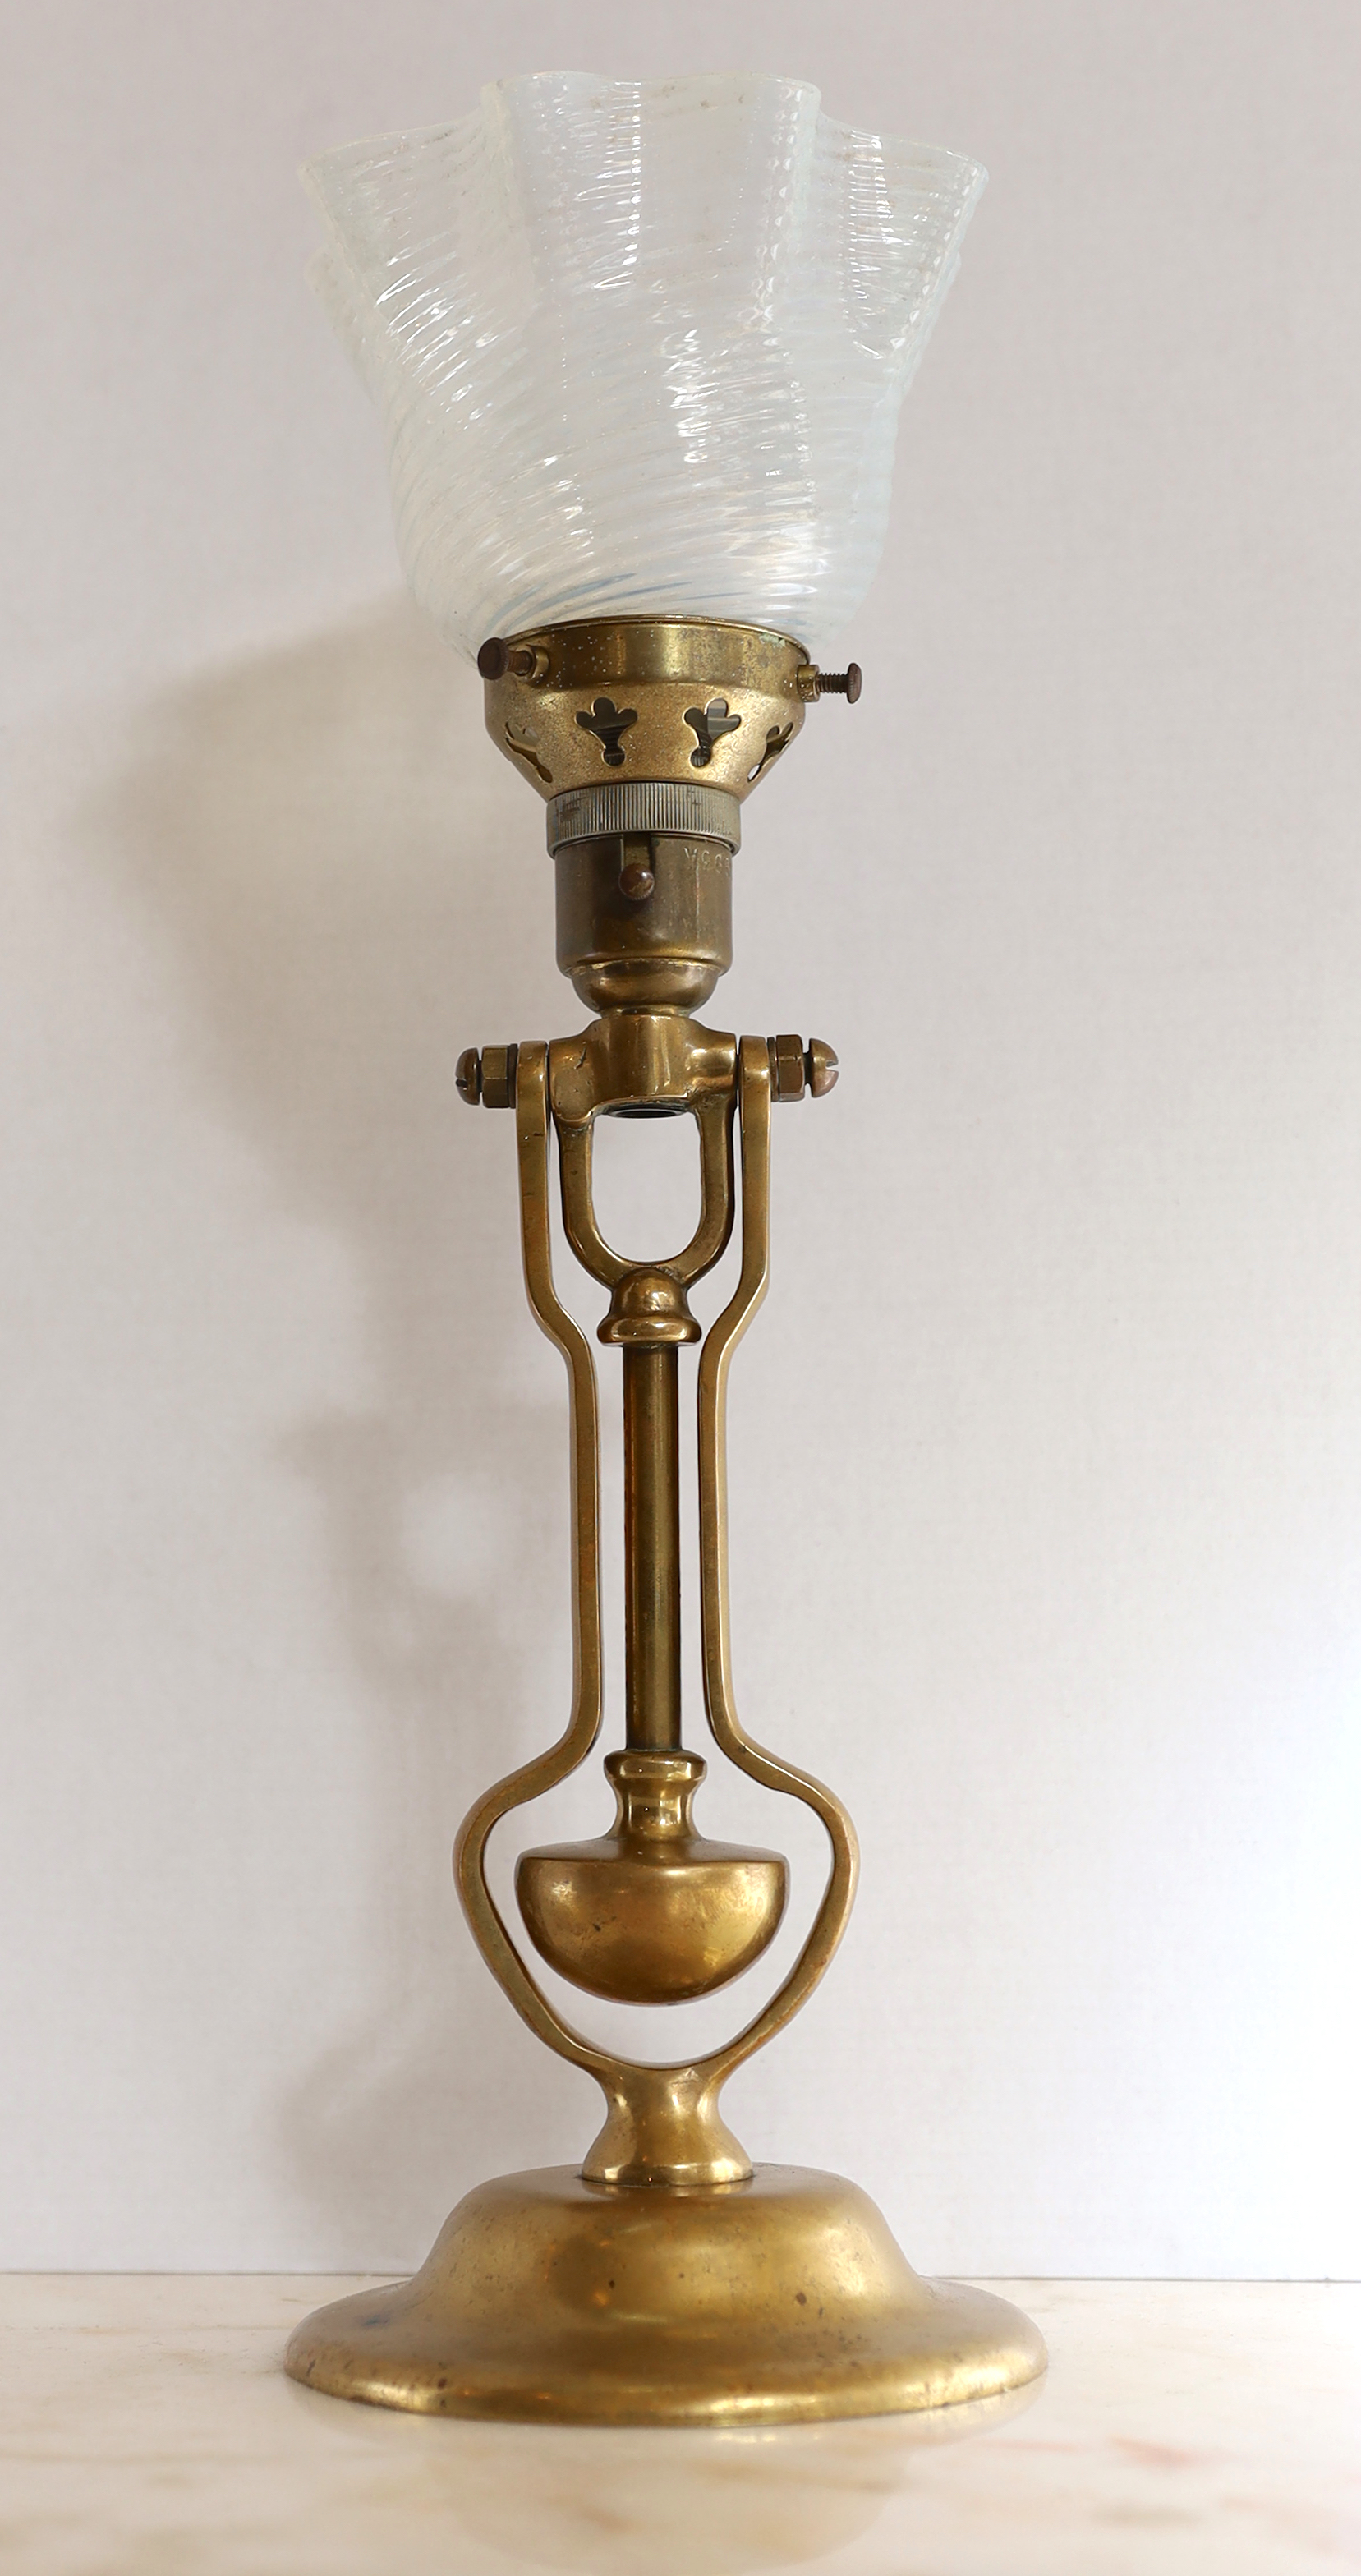 An early 20th century Scottish brass ship's gimballed desk lamp with vaseline glass shade, by - Image 3 of 3